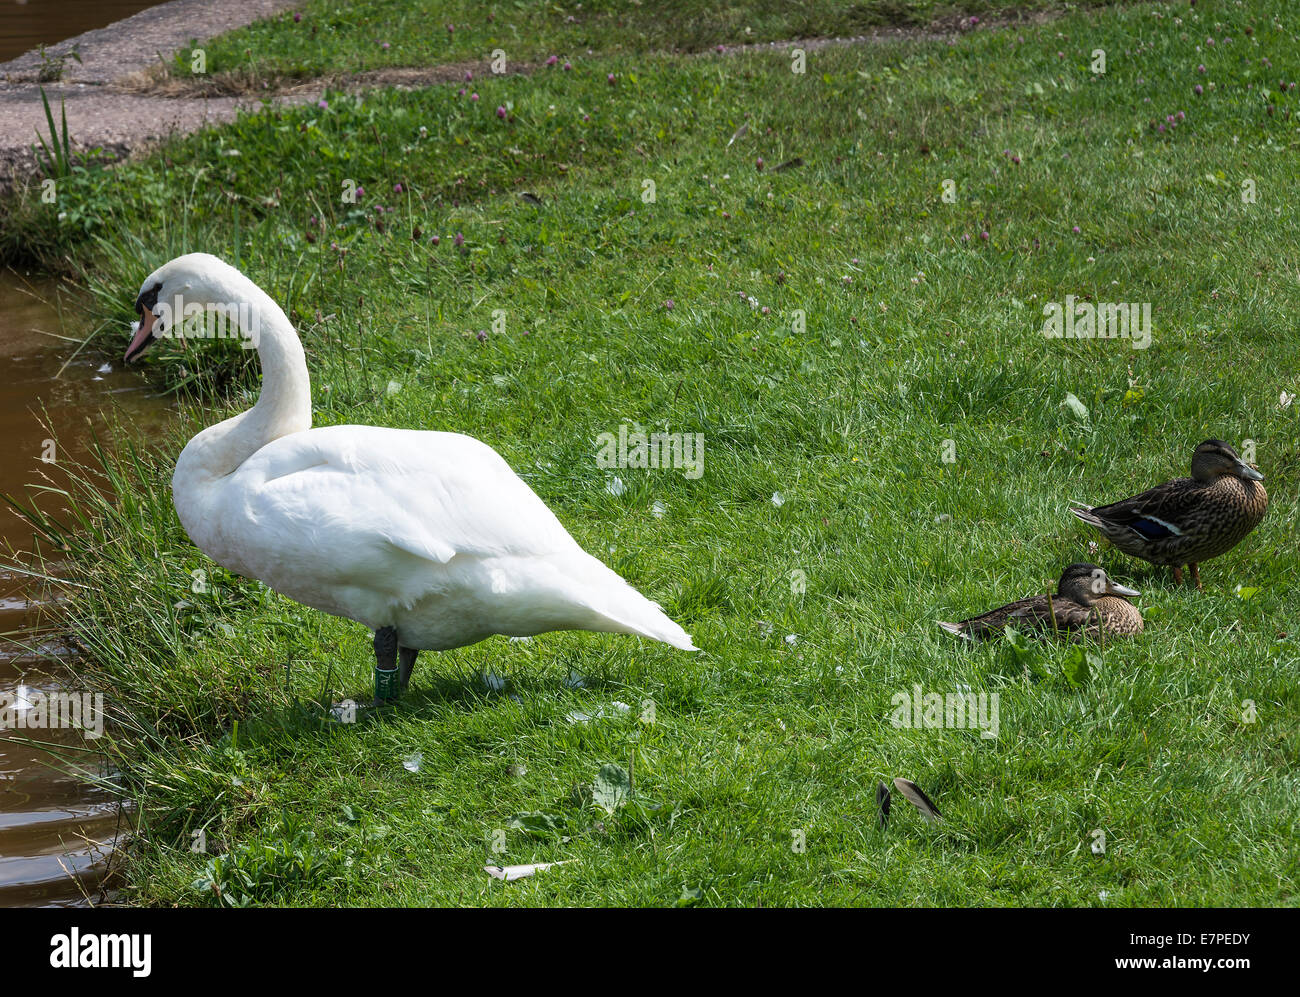 A Female Mute Swan and Two Mallard Ducks by the Trent and Mersey Canal at Rode Heath Cheshire England United Kingdom UK Stock Photo